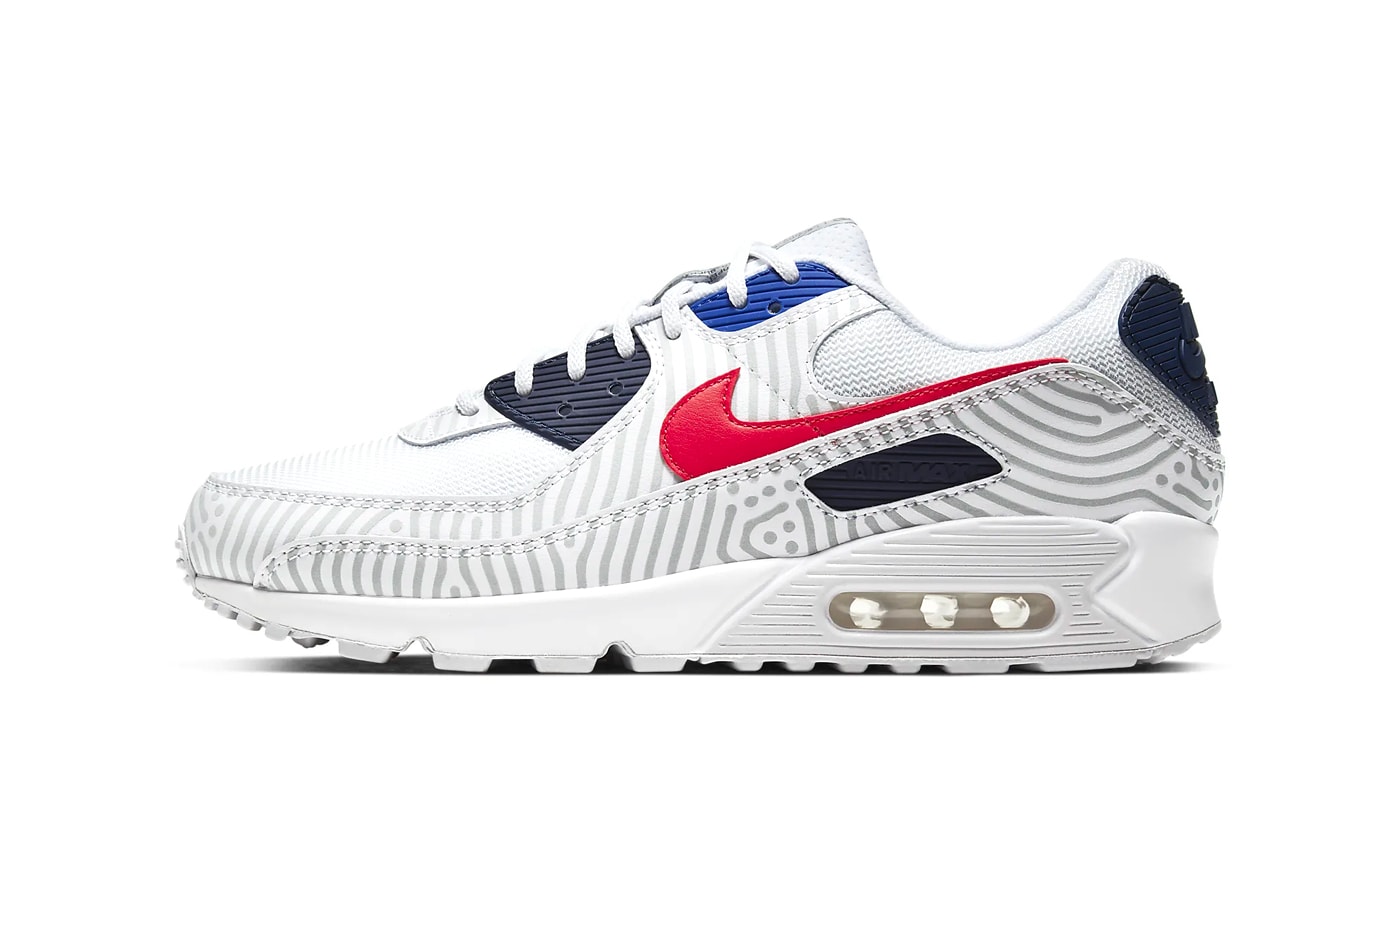 Nike Air Max 90 white University Red Bright Blue midnight navy reflective stripes streetwear trainers runners sneakers shoes kicks ss20 CW7574 100